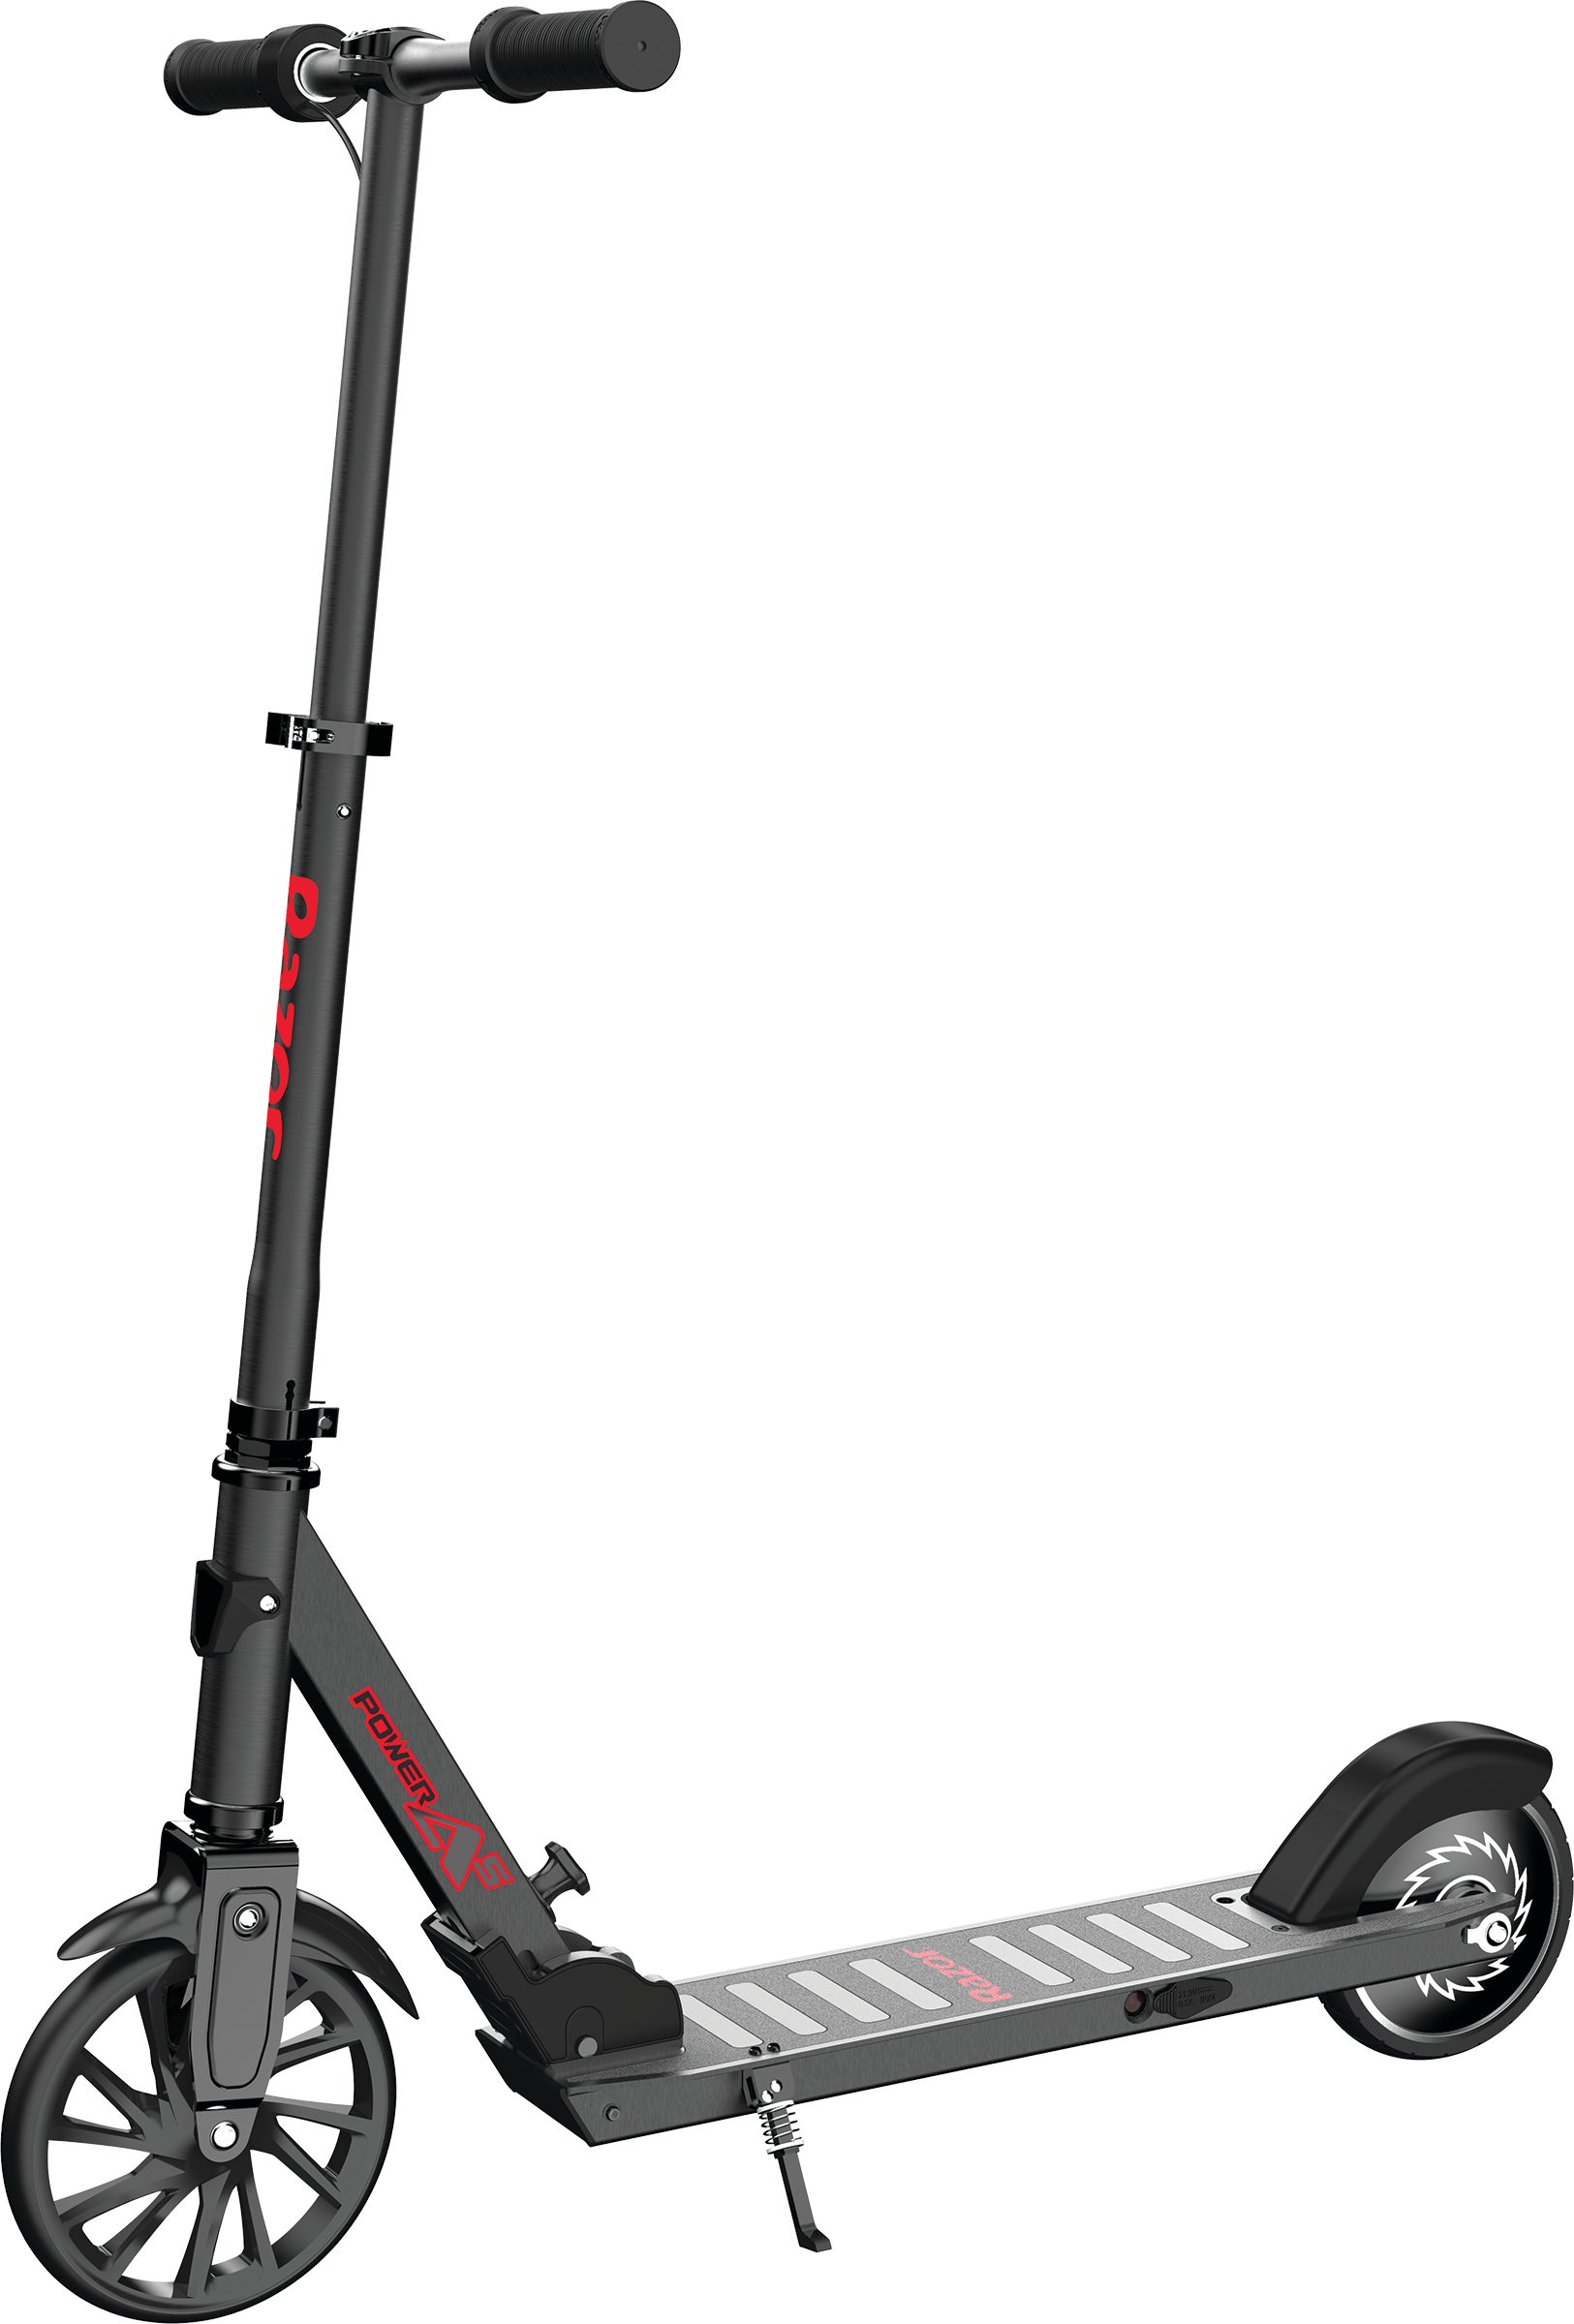 Razor Power A5 Black Label - 22V Lithium Ion Electric-Powered Scooter $59